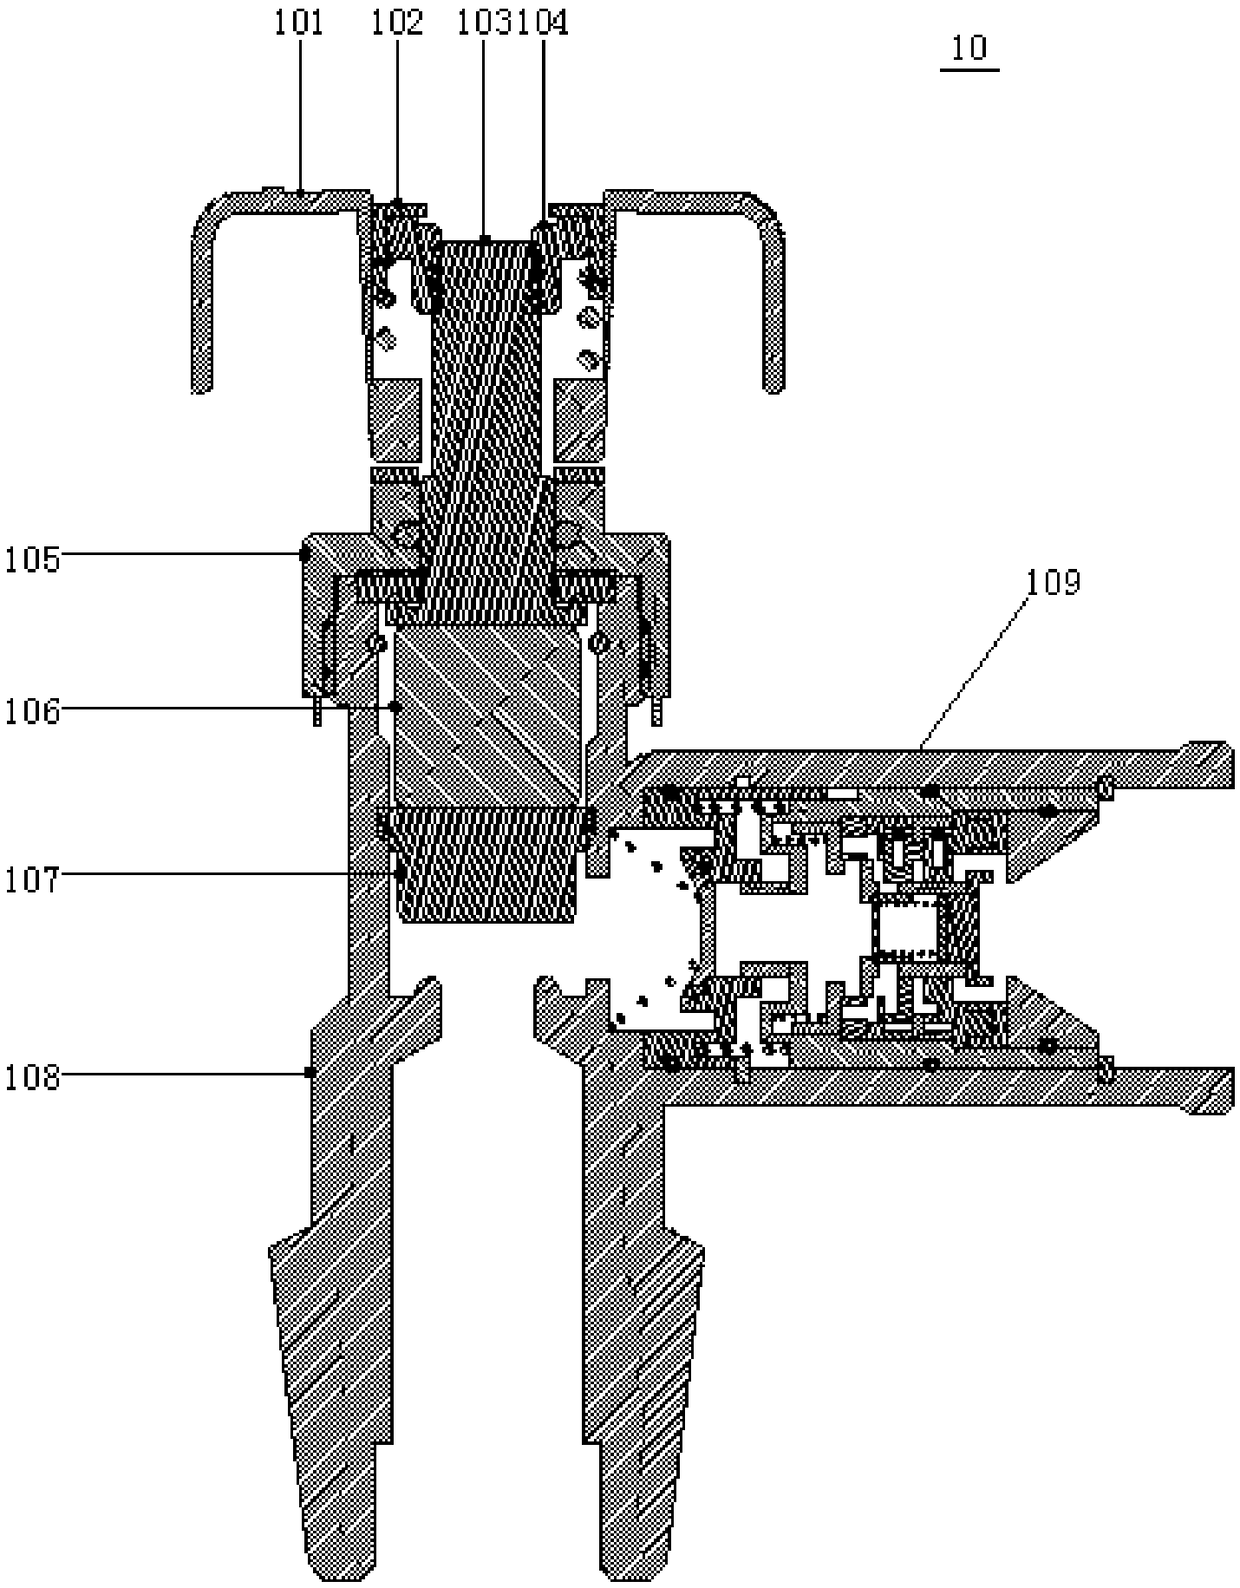 Pure mechanical type coded lock valve device with self-closing mechanism